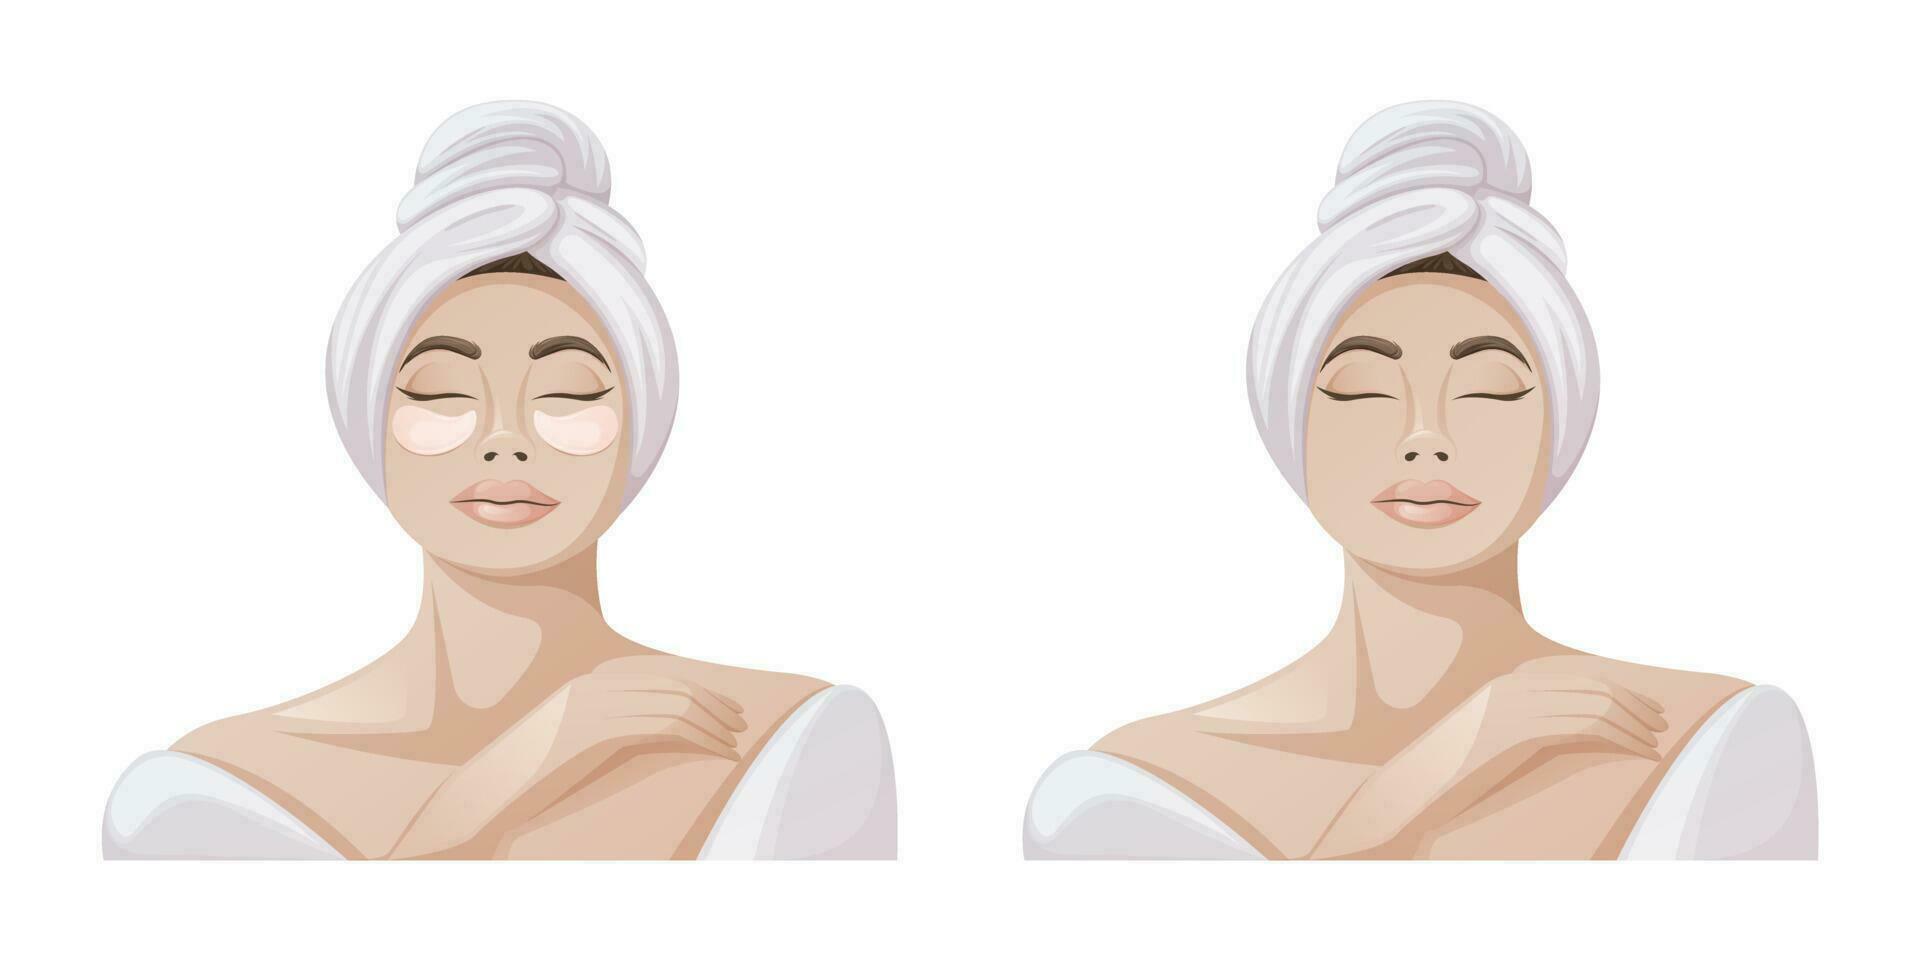 Woman in white bathrobe and towel. The concept of spa, relaxation, face and body skin care. Eye patches. Health and beauty. Trendy vector illustration